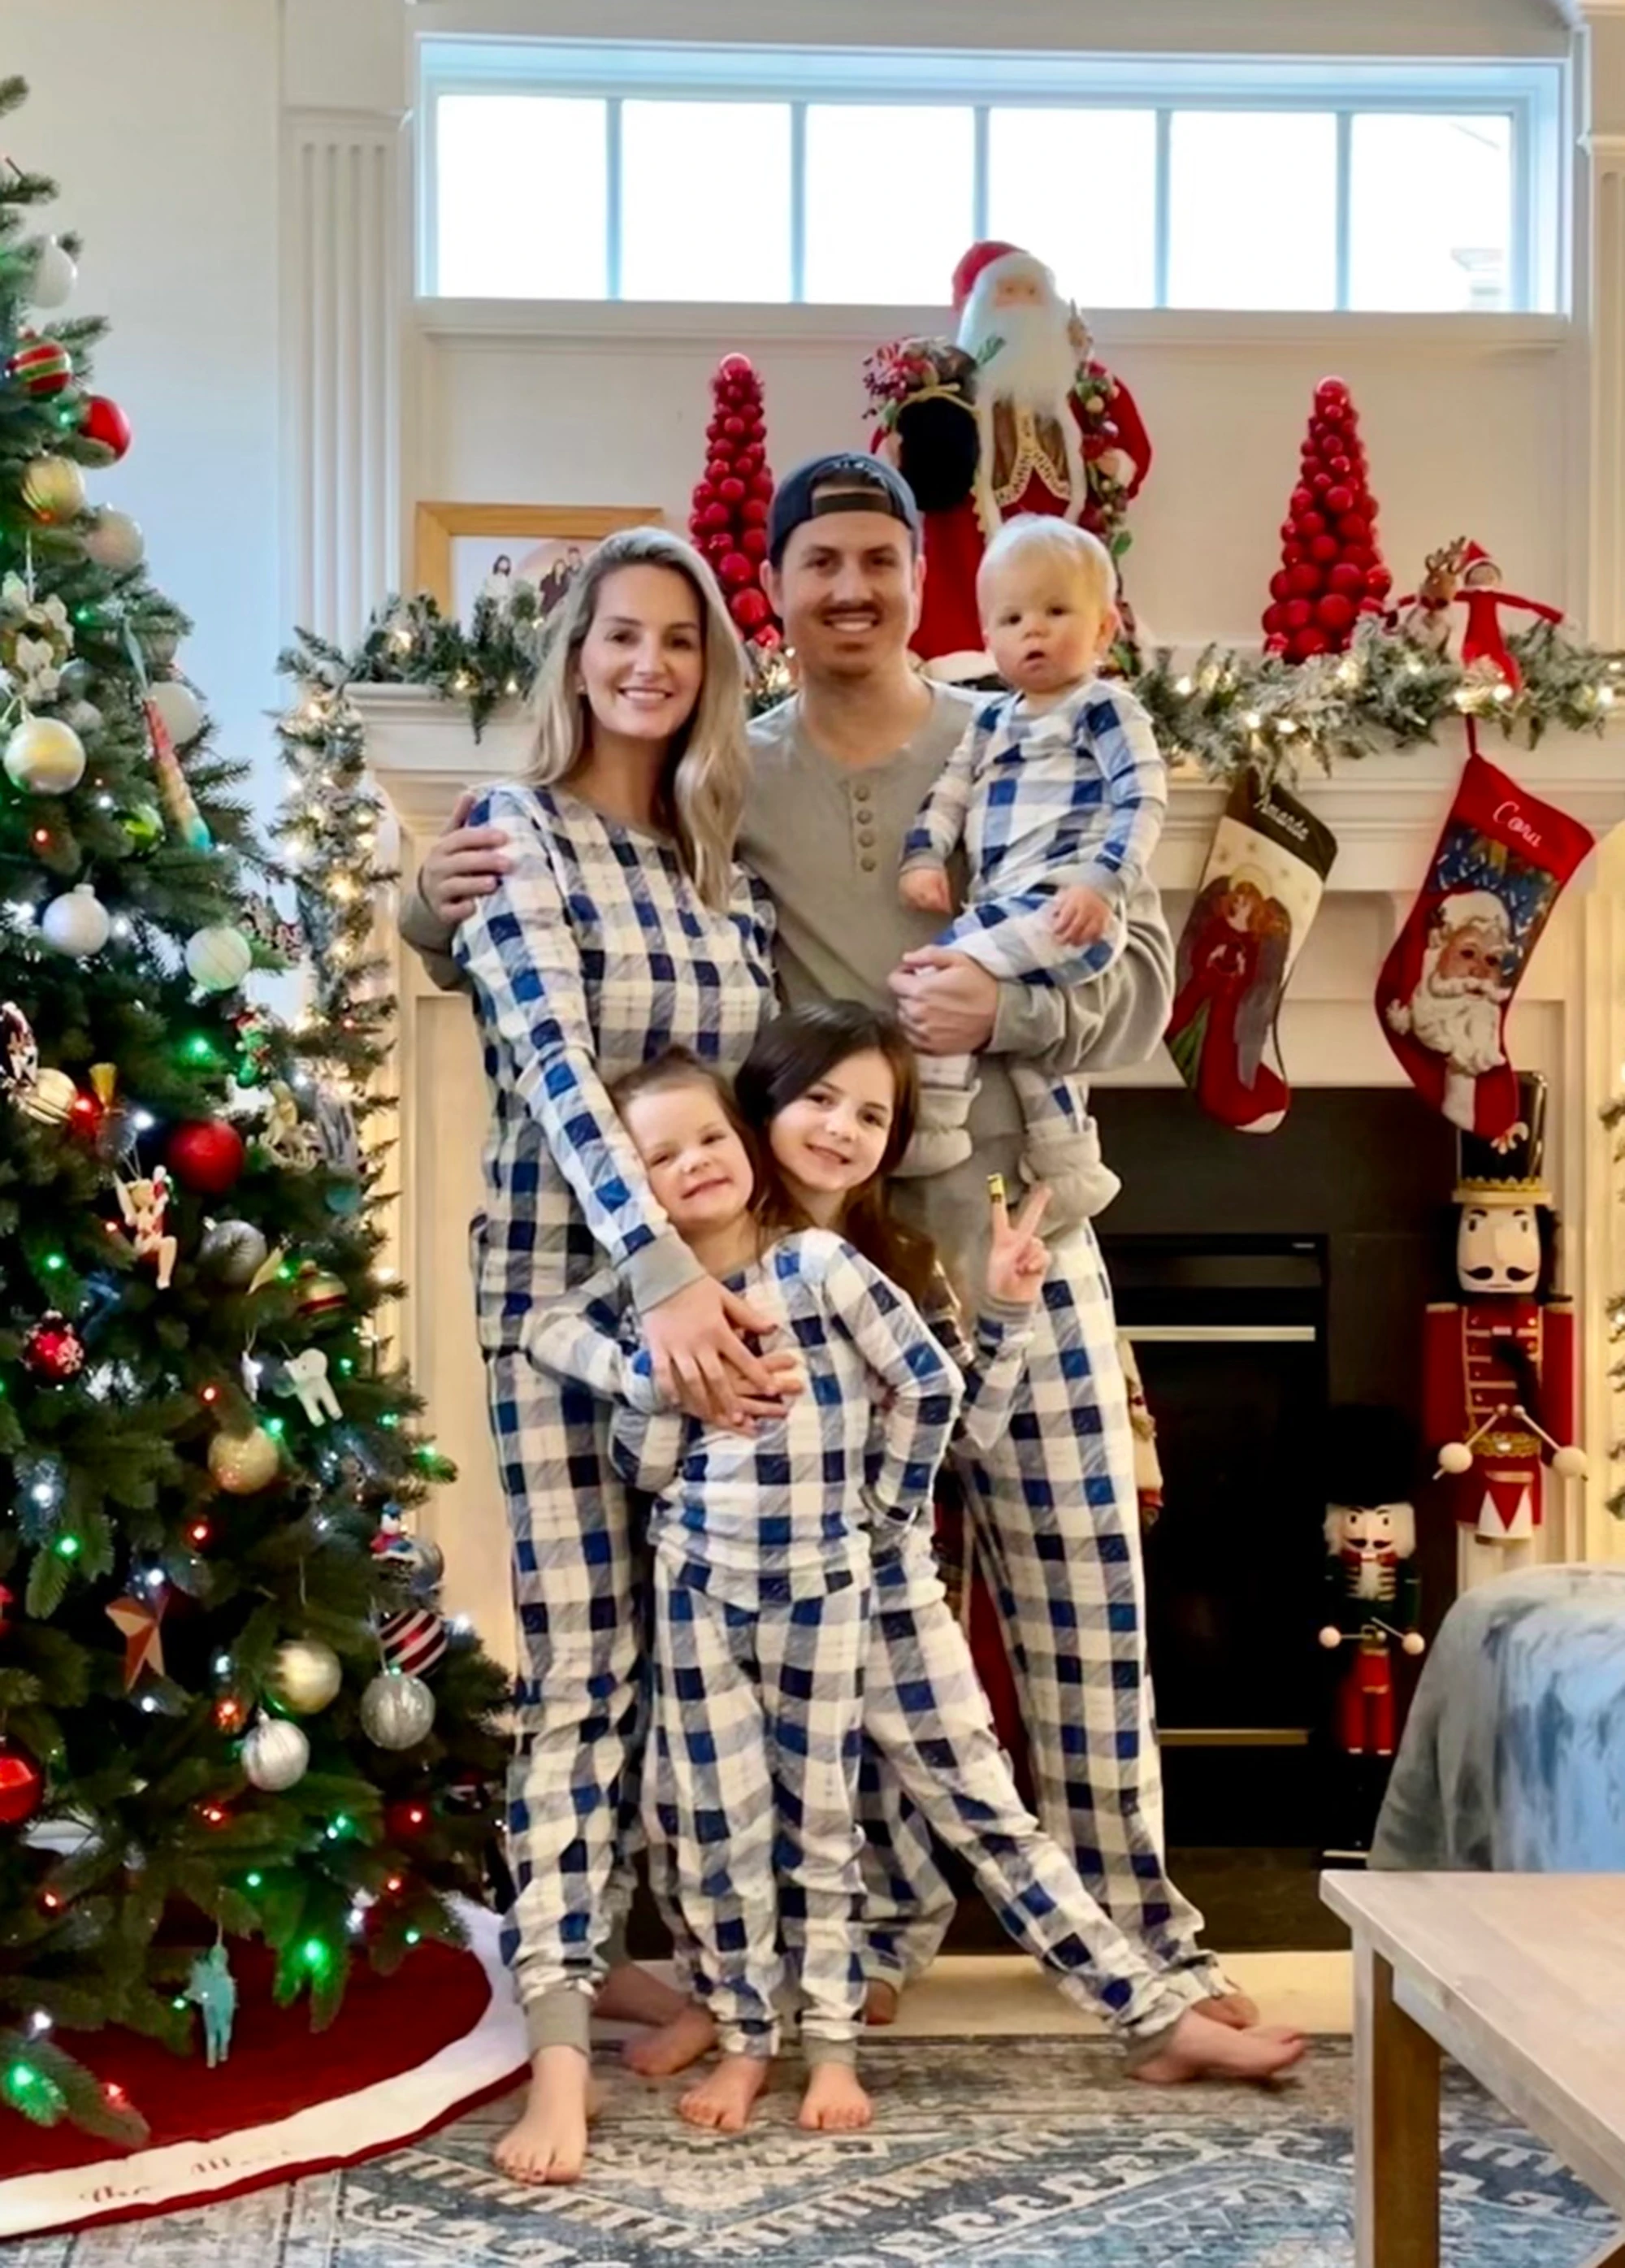 Mr Ballen and Amanda celebrated Christmas with their children